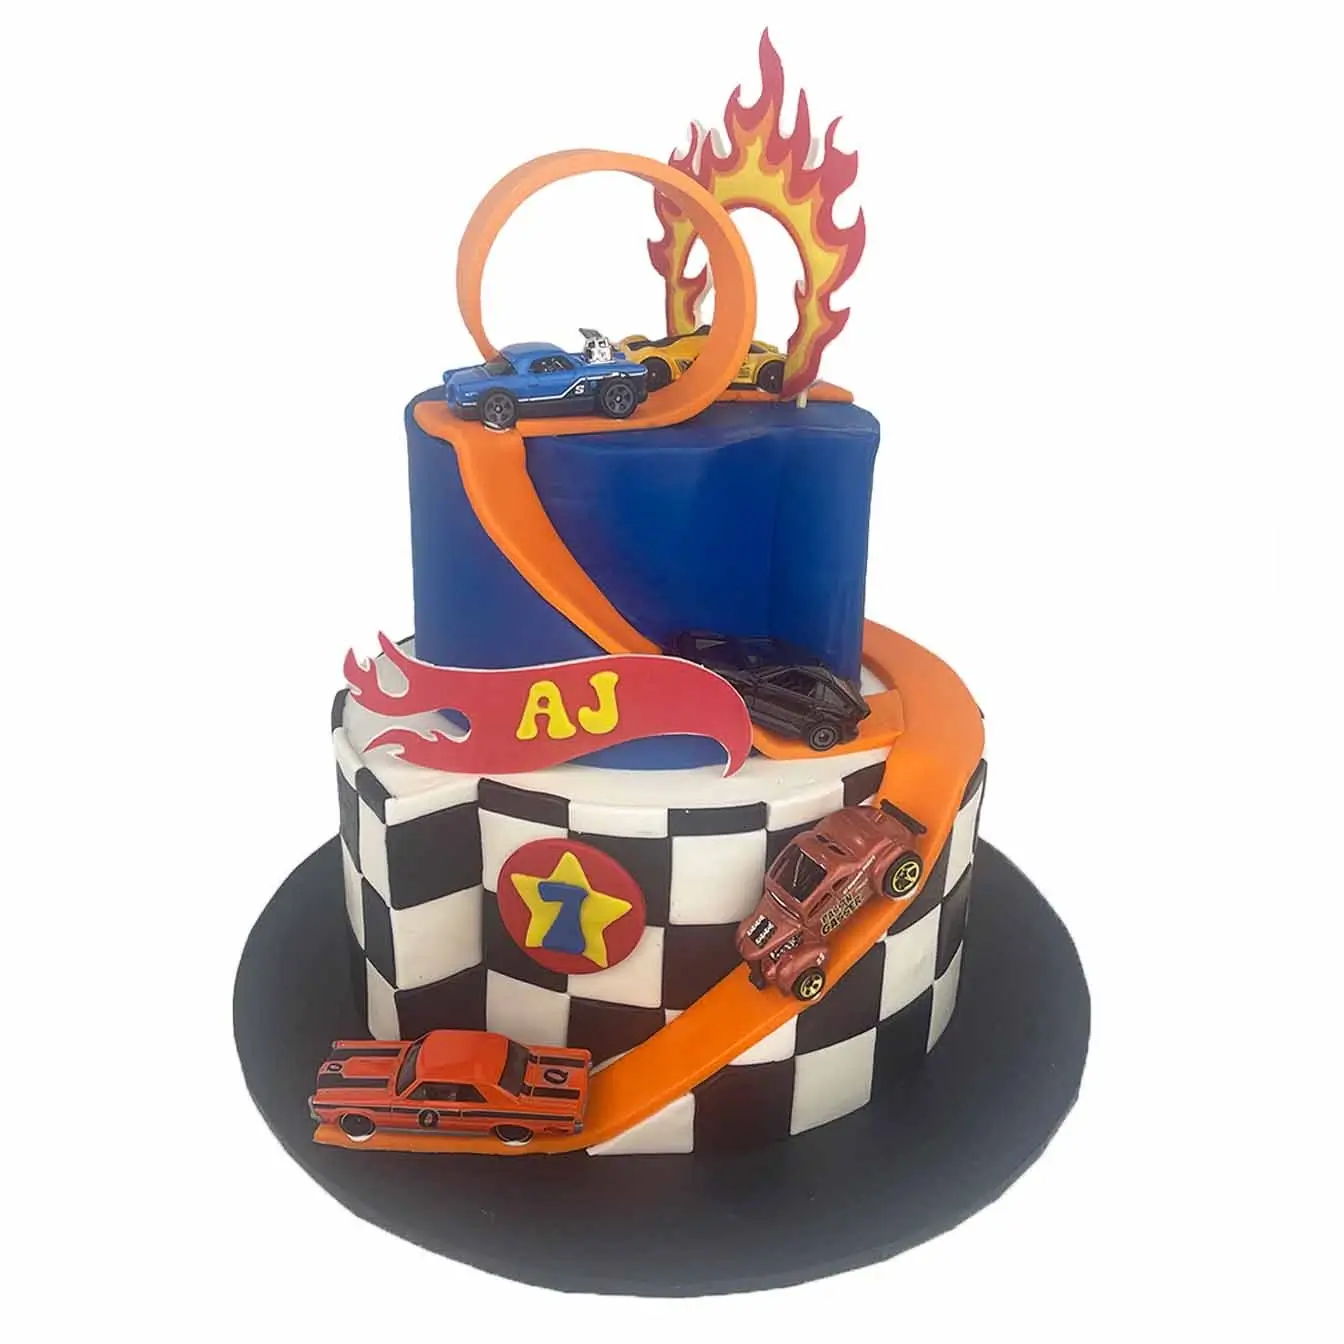 Hot Wheels Adventure Cake - A two-tier cake with a thrilling loop, carved race track, black-and-white squares, and a fiery loop, a show-stopping centerpiece for birthdays and racing-themed celebrations.